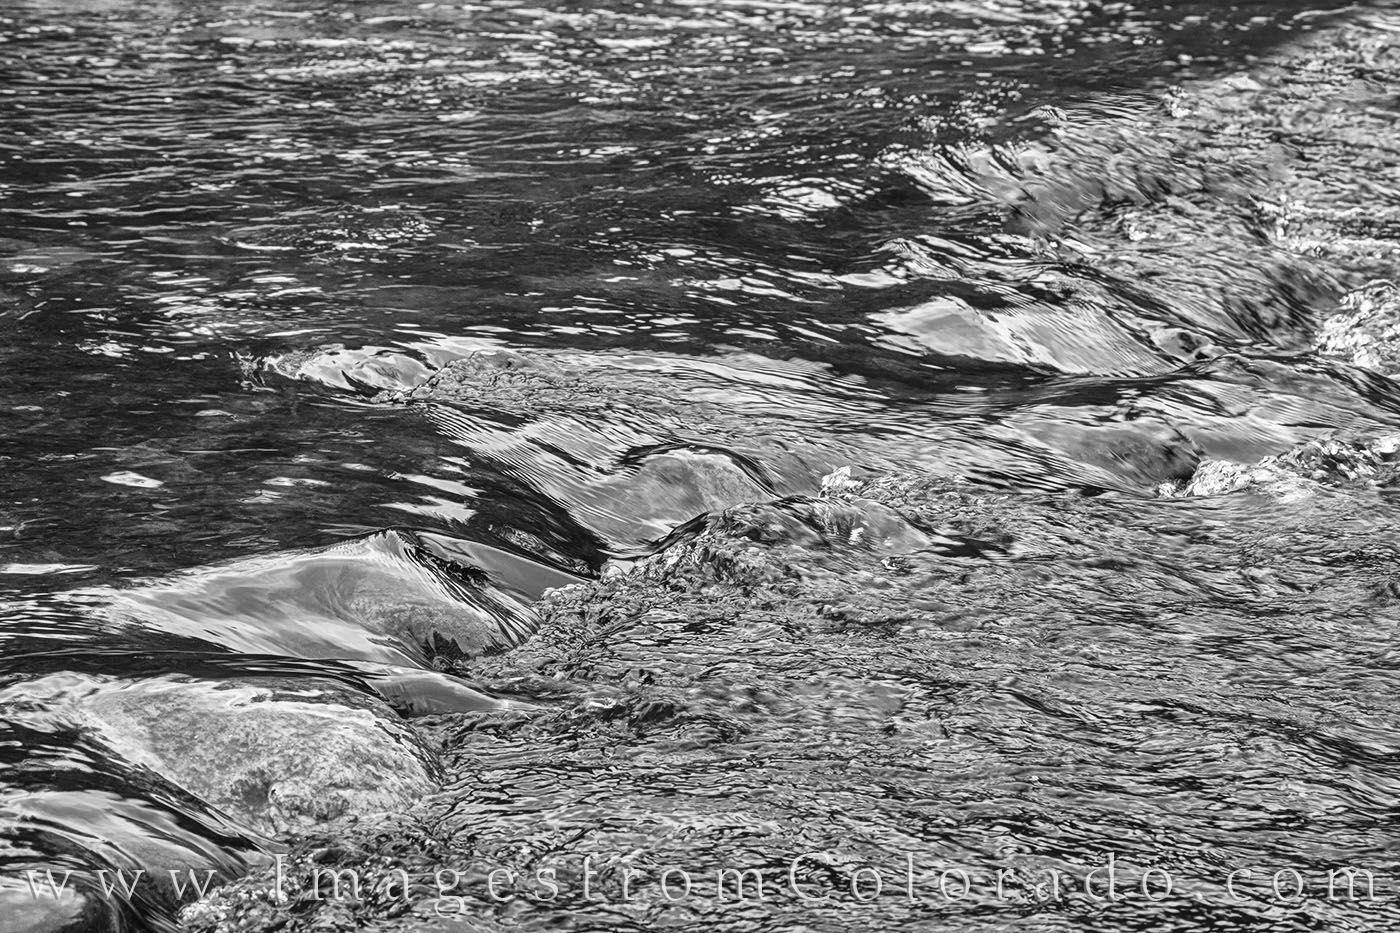 During spring runoff, the cold water of the Fraser River runs clear and clean. This little rapid was taken along the Fraser River...